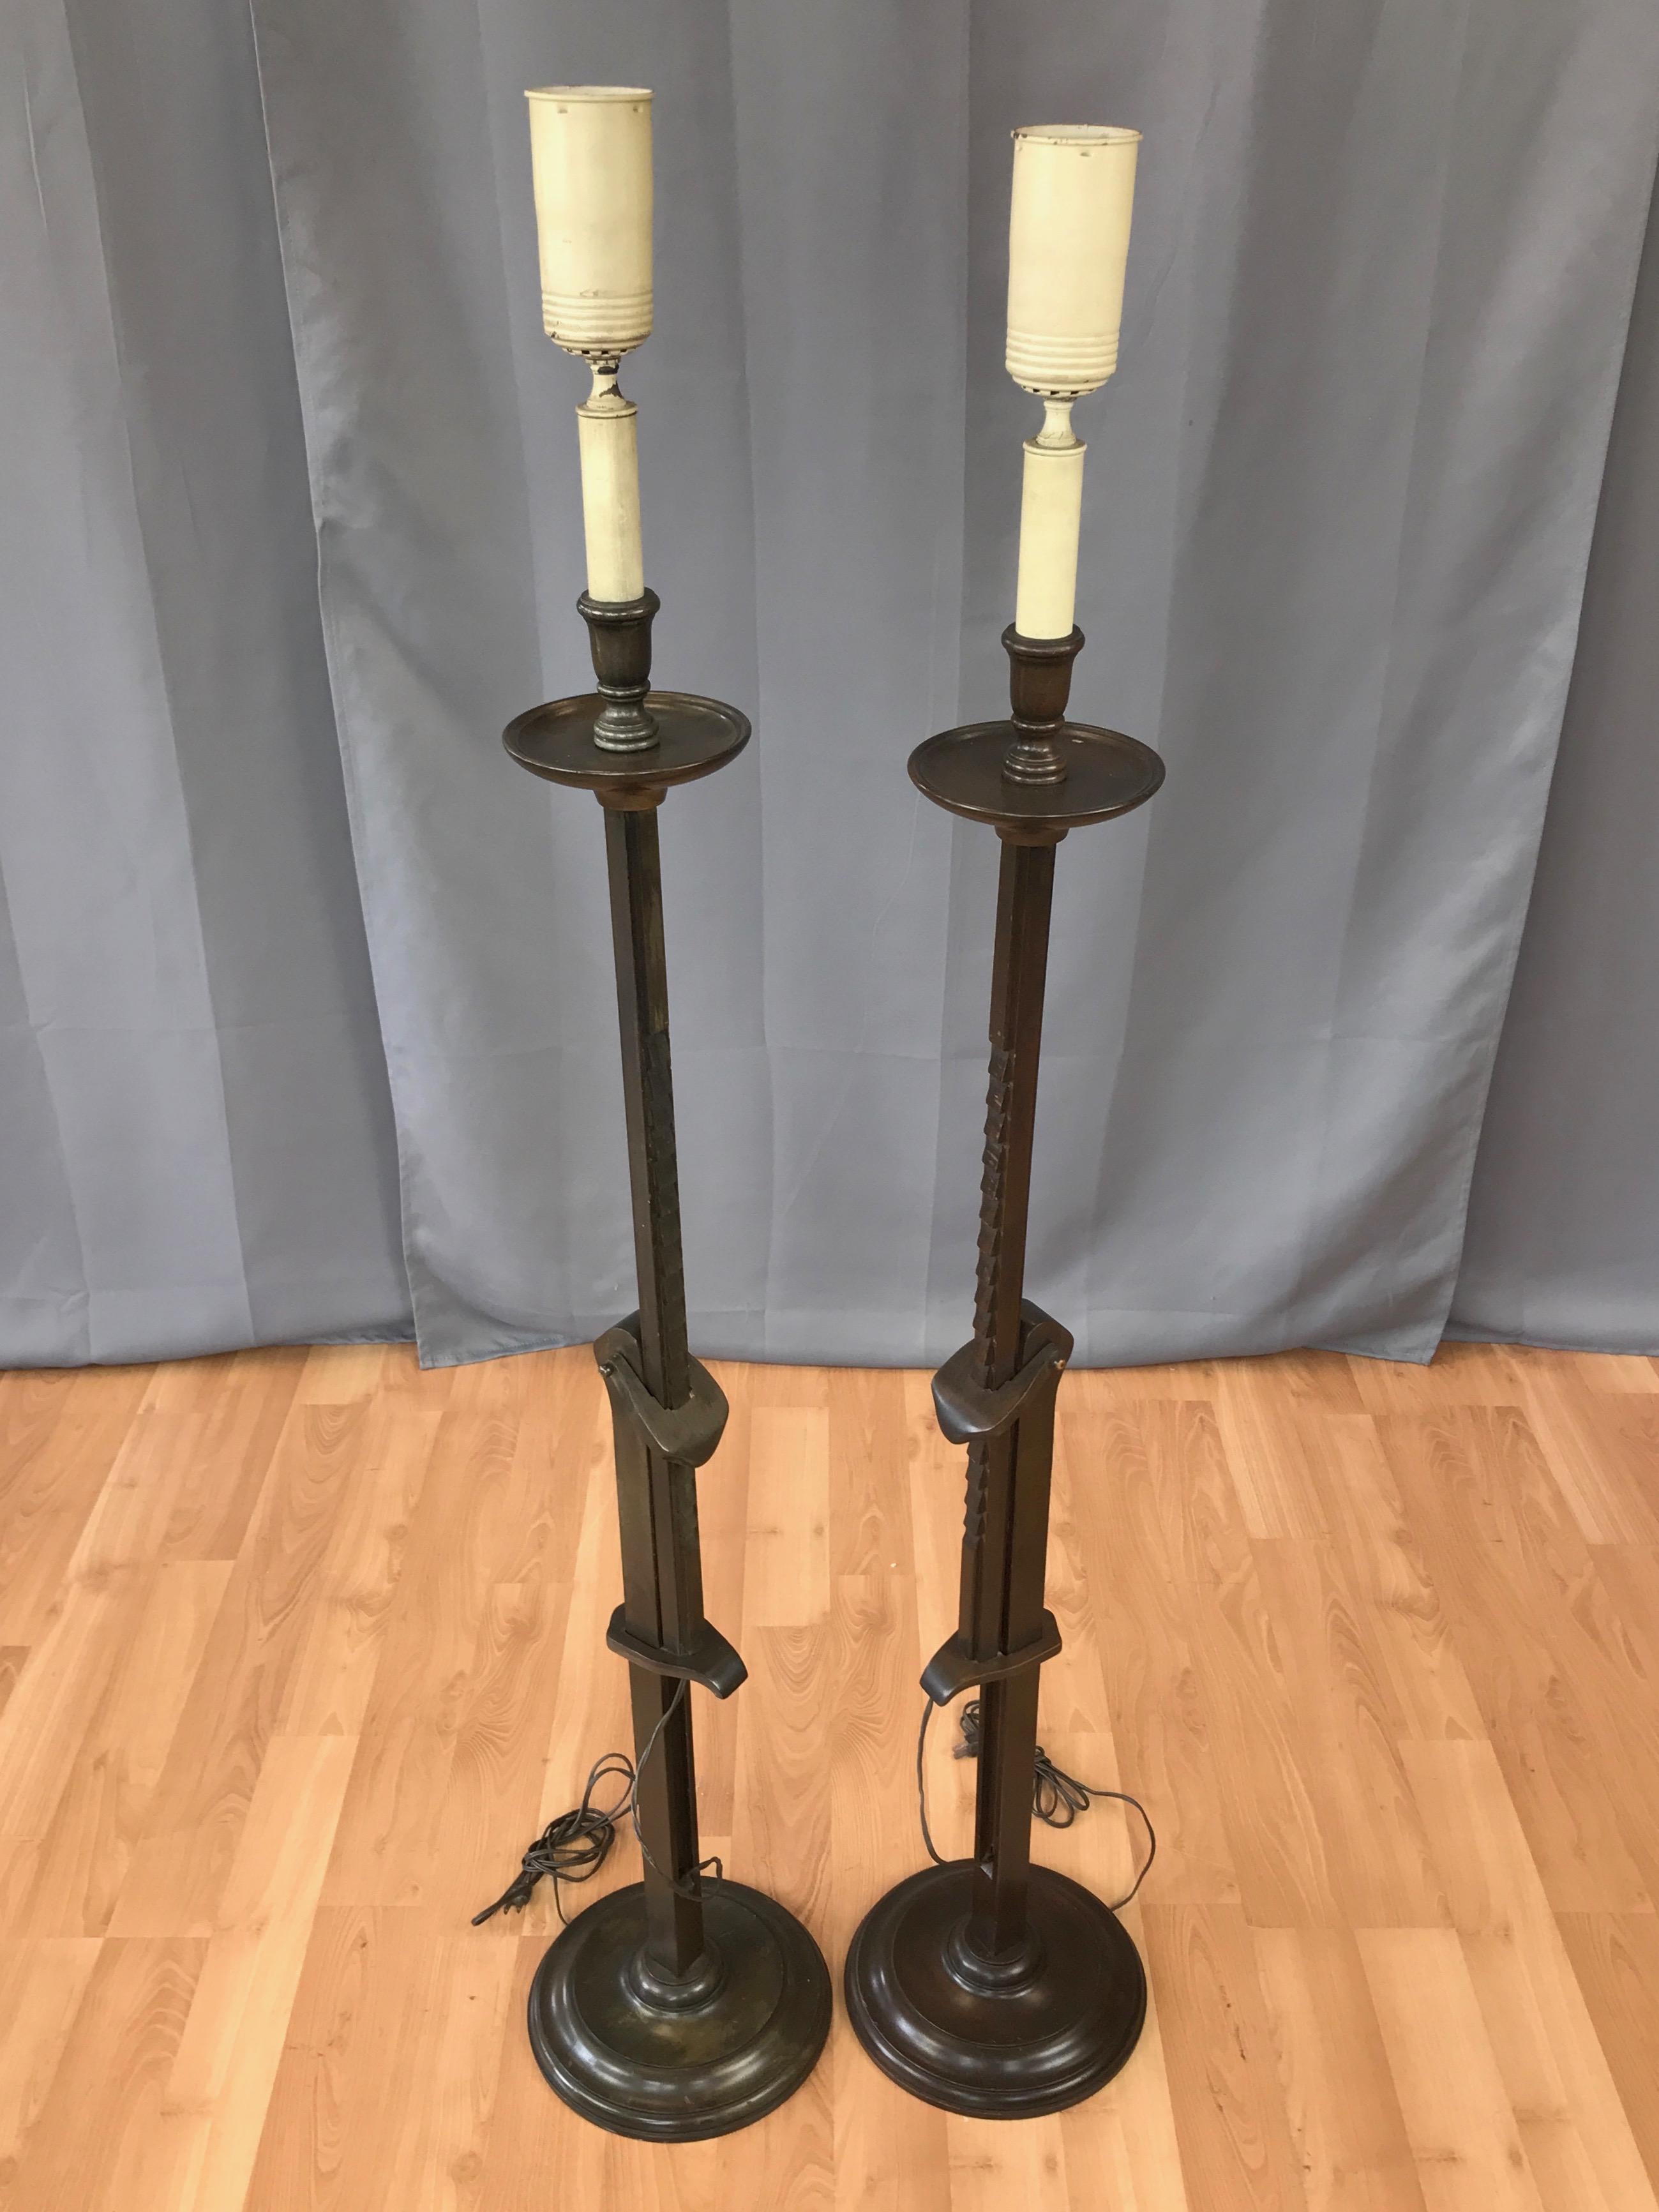 Mission Pair of Frances Elkins Ratcheted Adjustable Height Mahogany Floor Lamps, 1940s